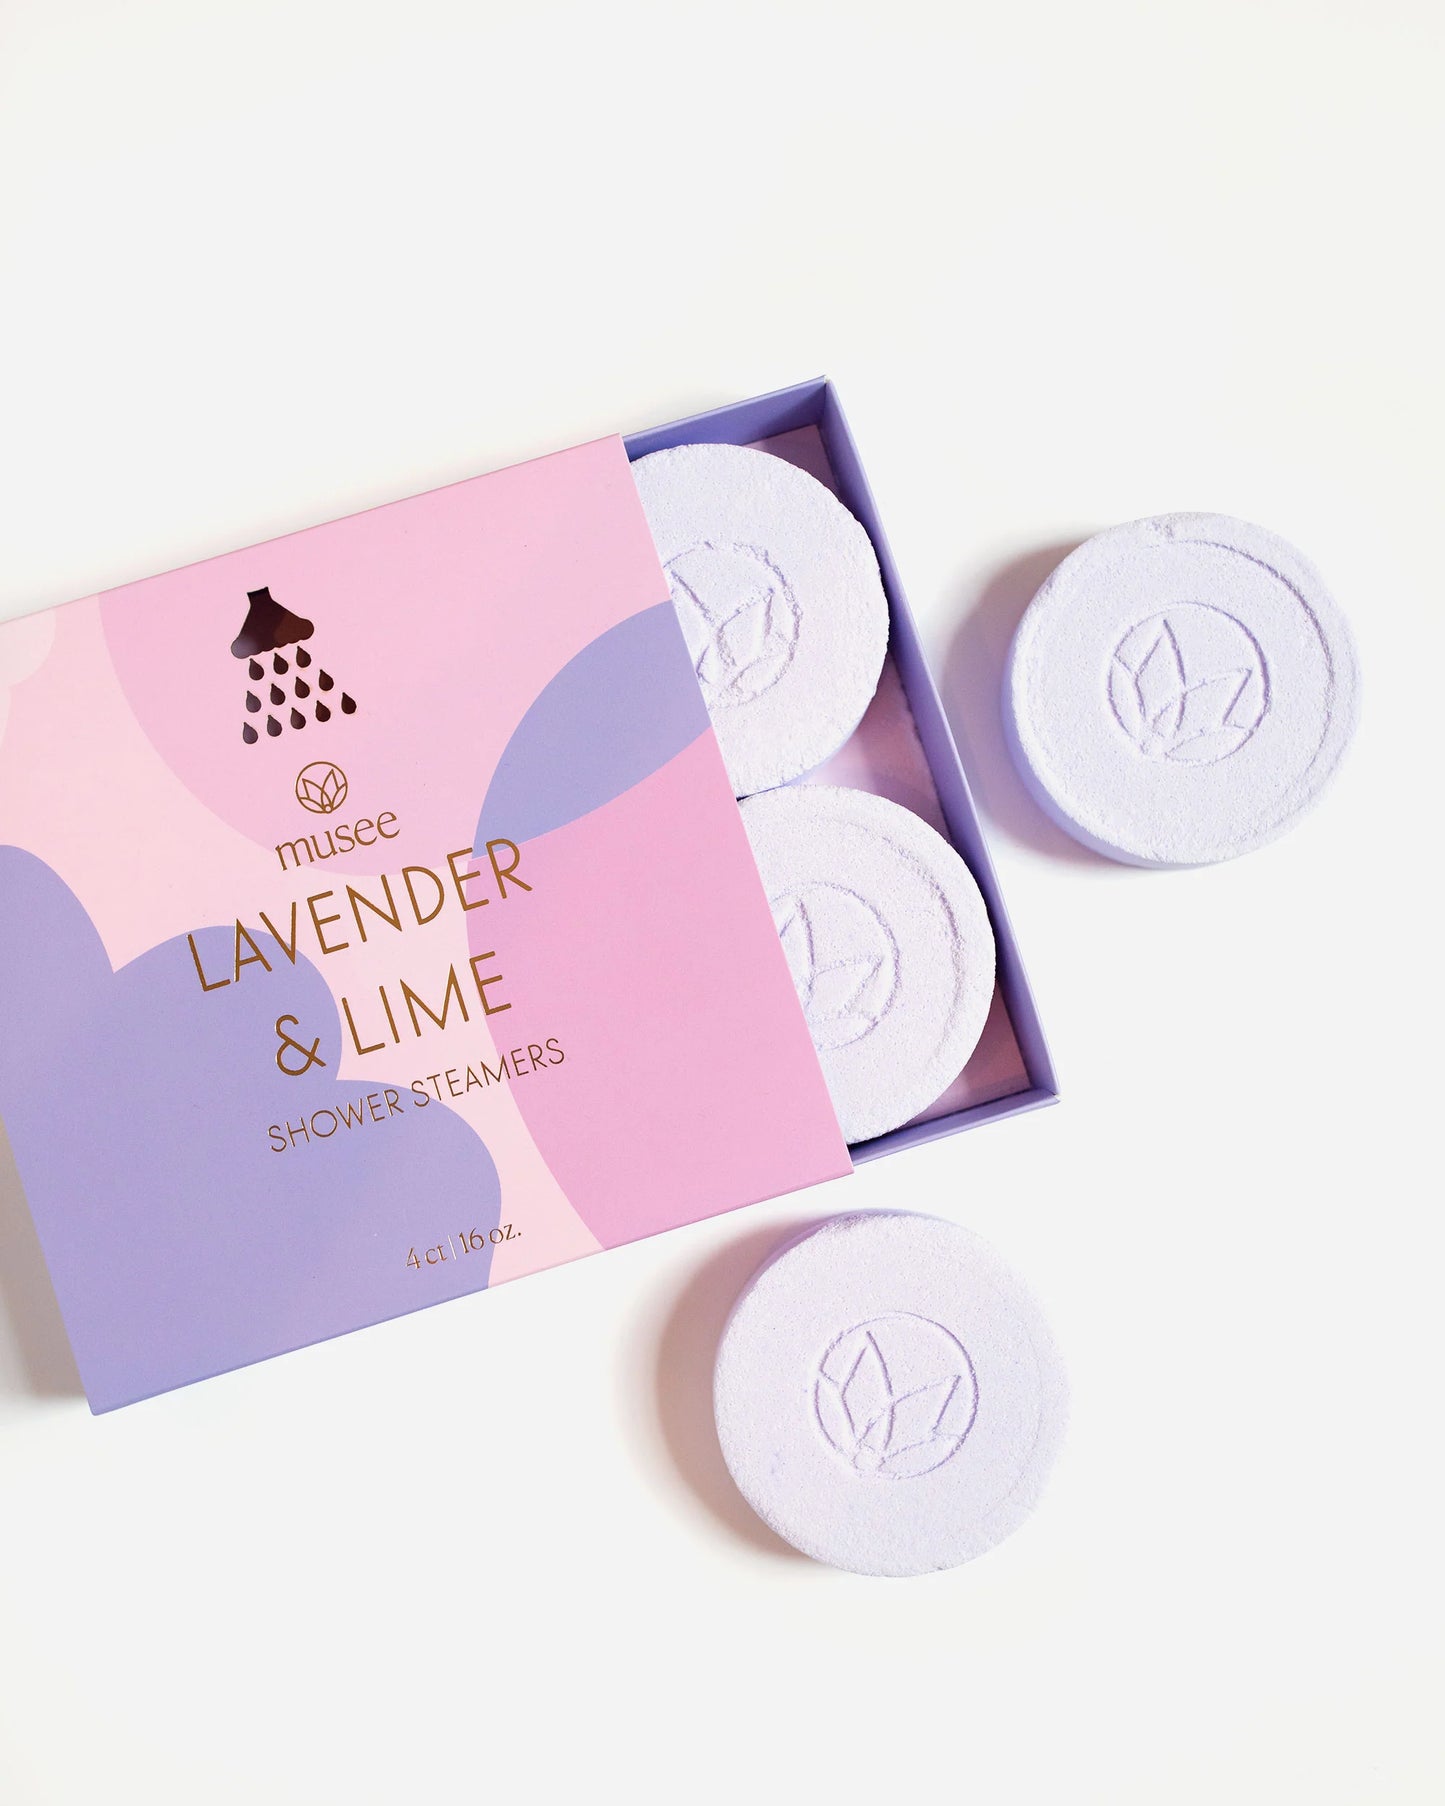 A box of Musee Lavender & Lime Shower Steamers on a white surface.